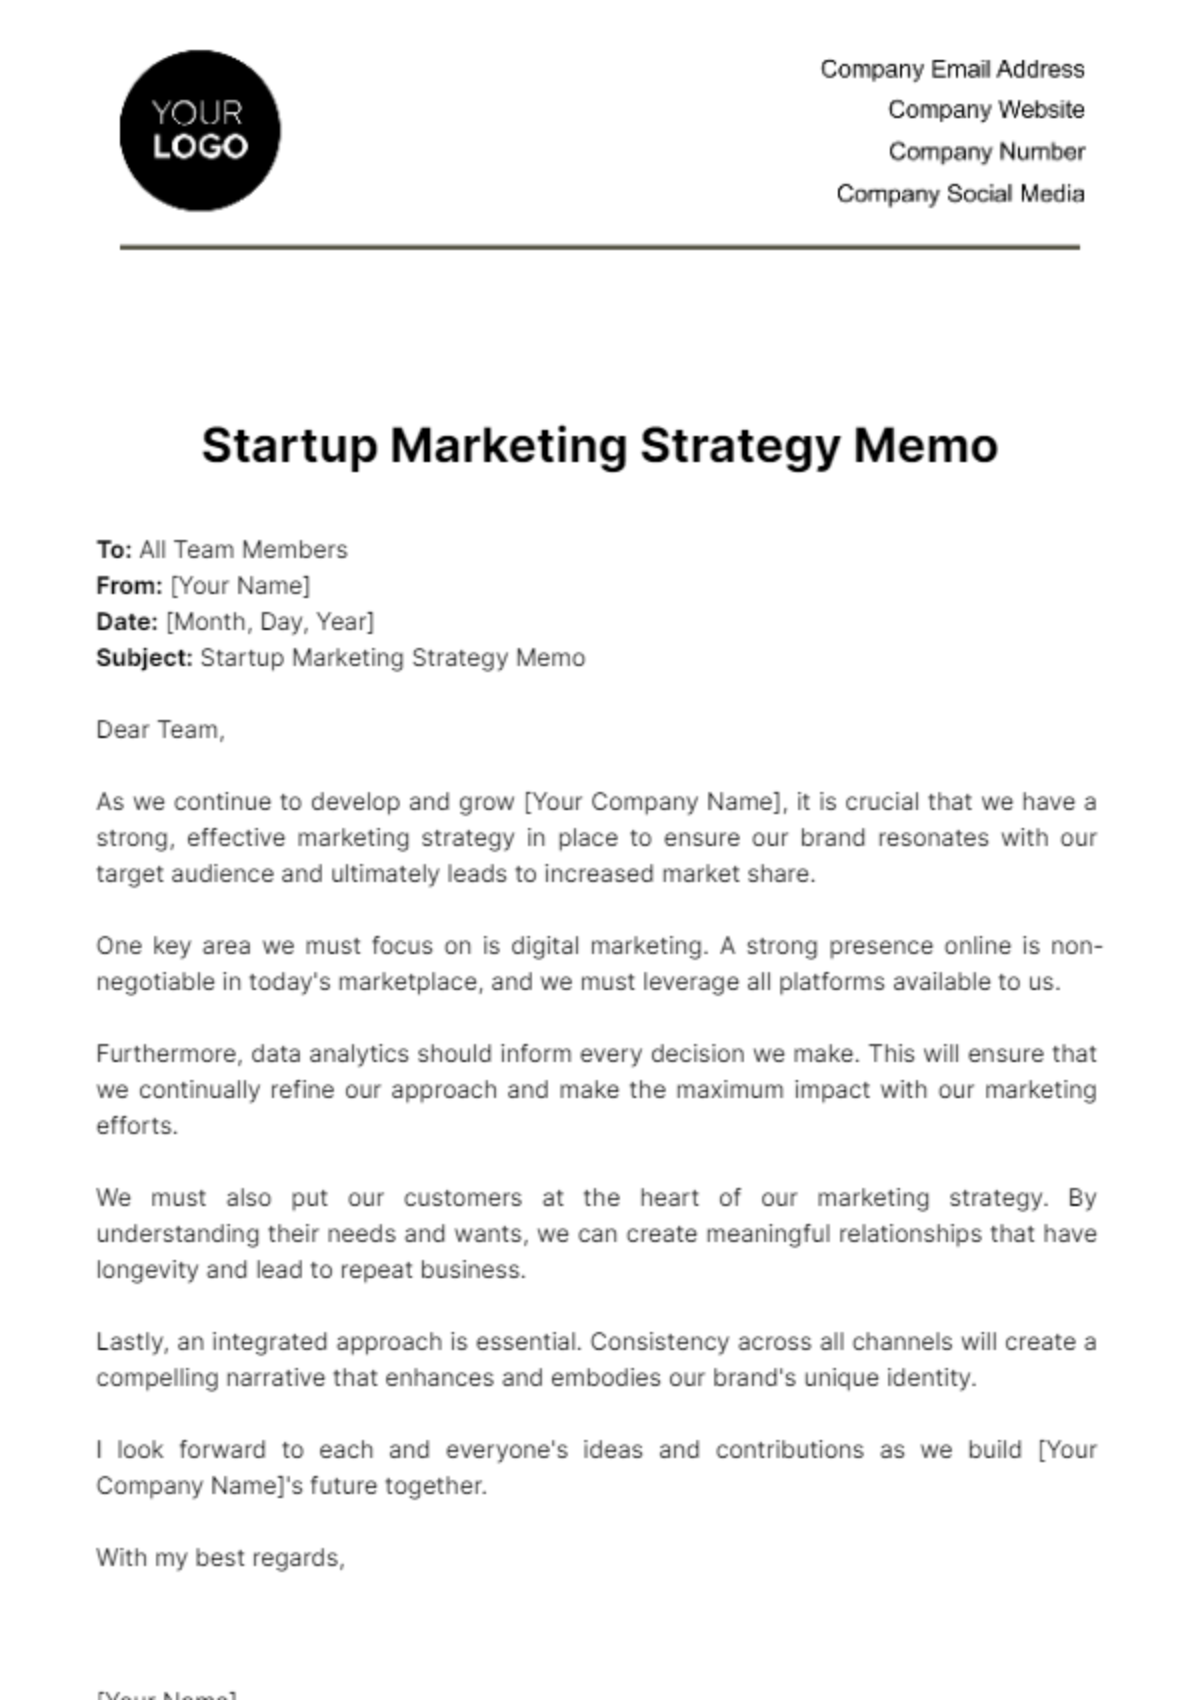 Startup Marketing Strategy Memo Template